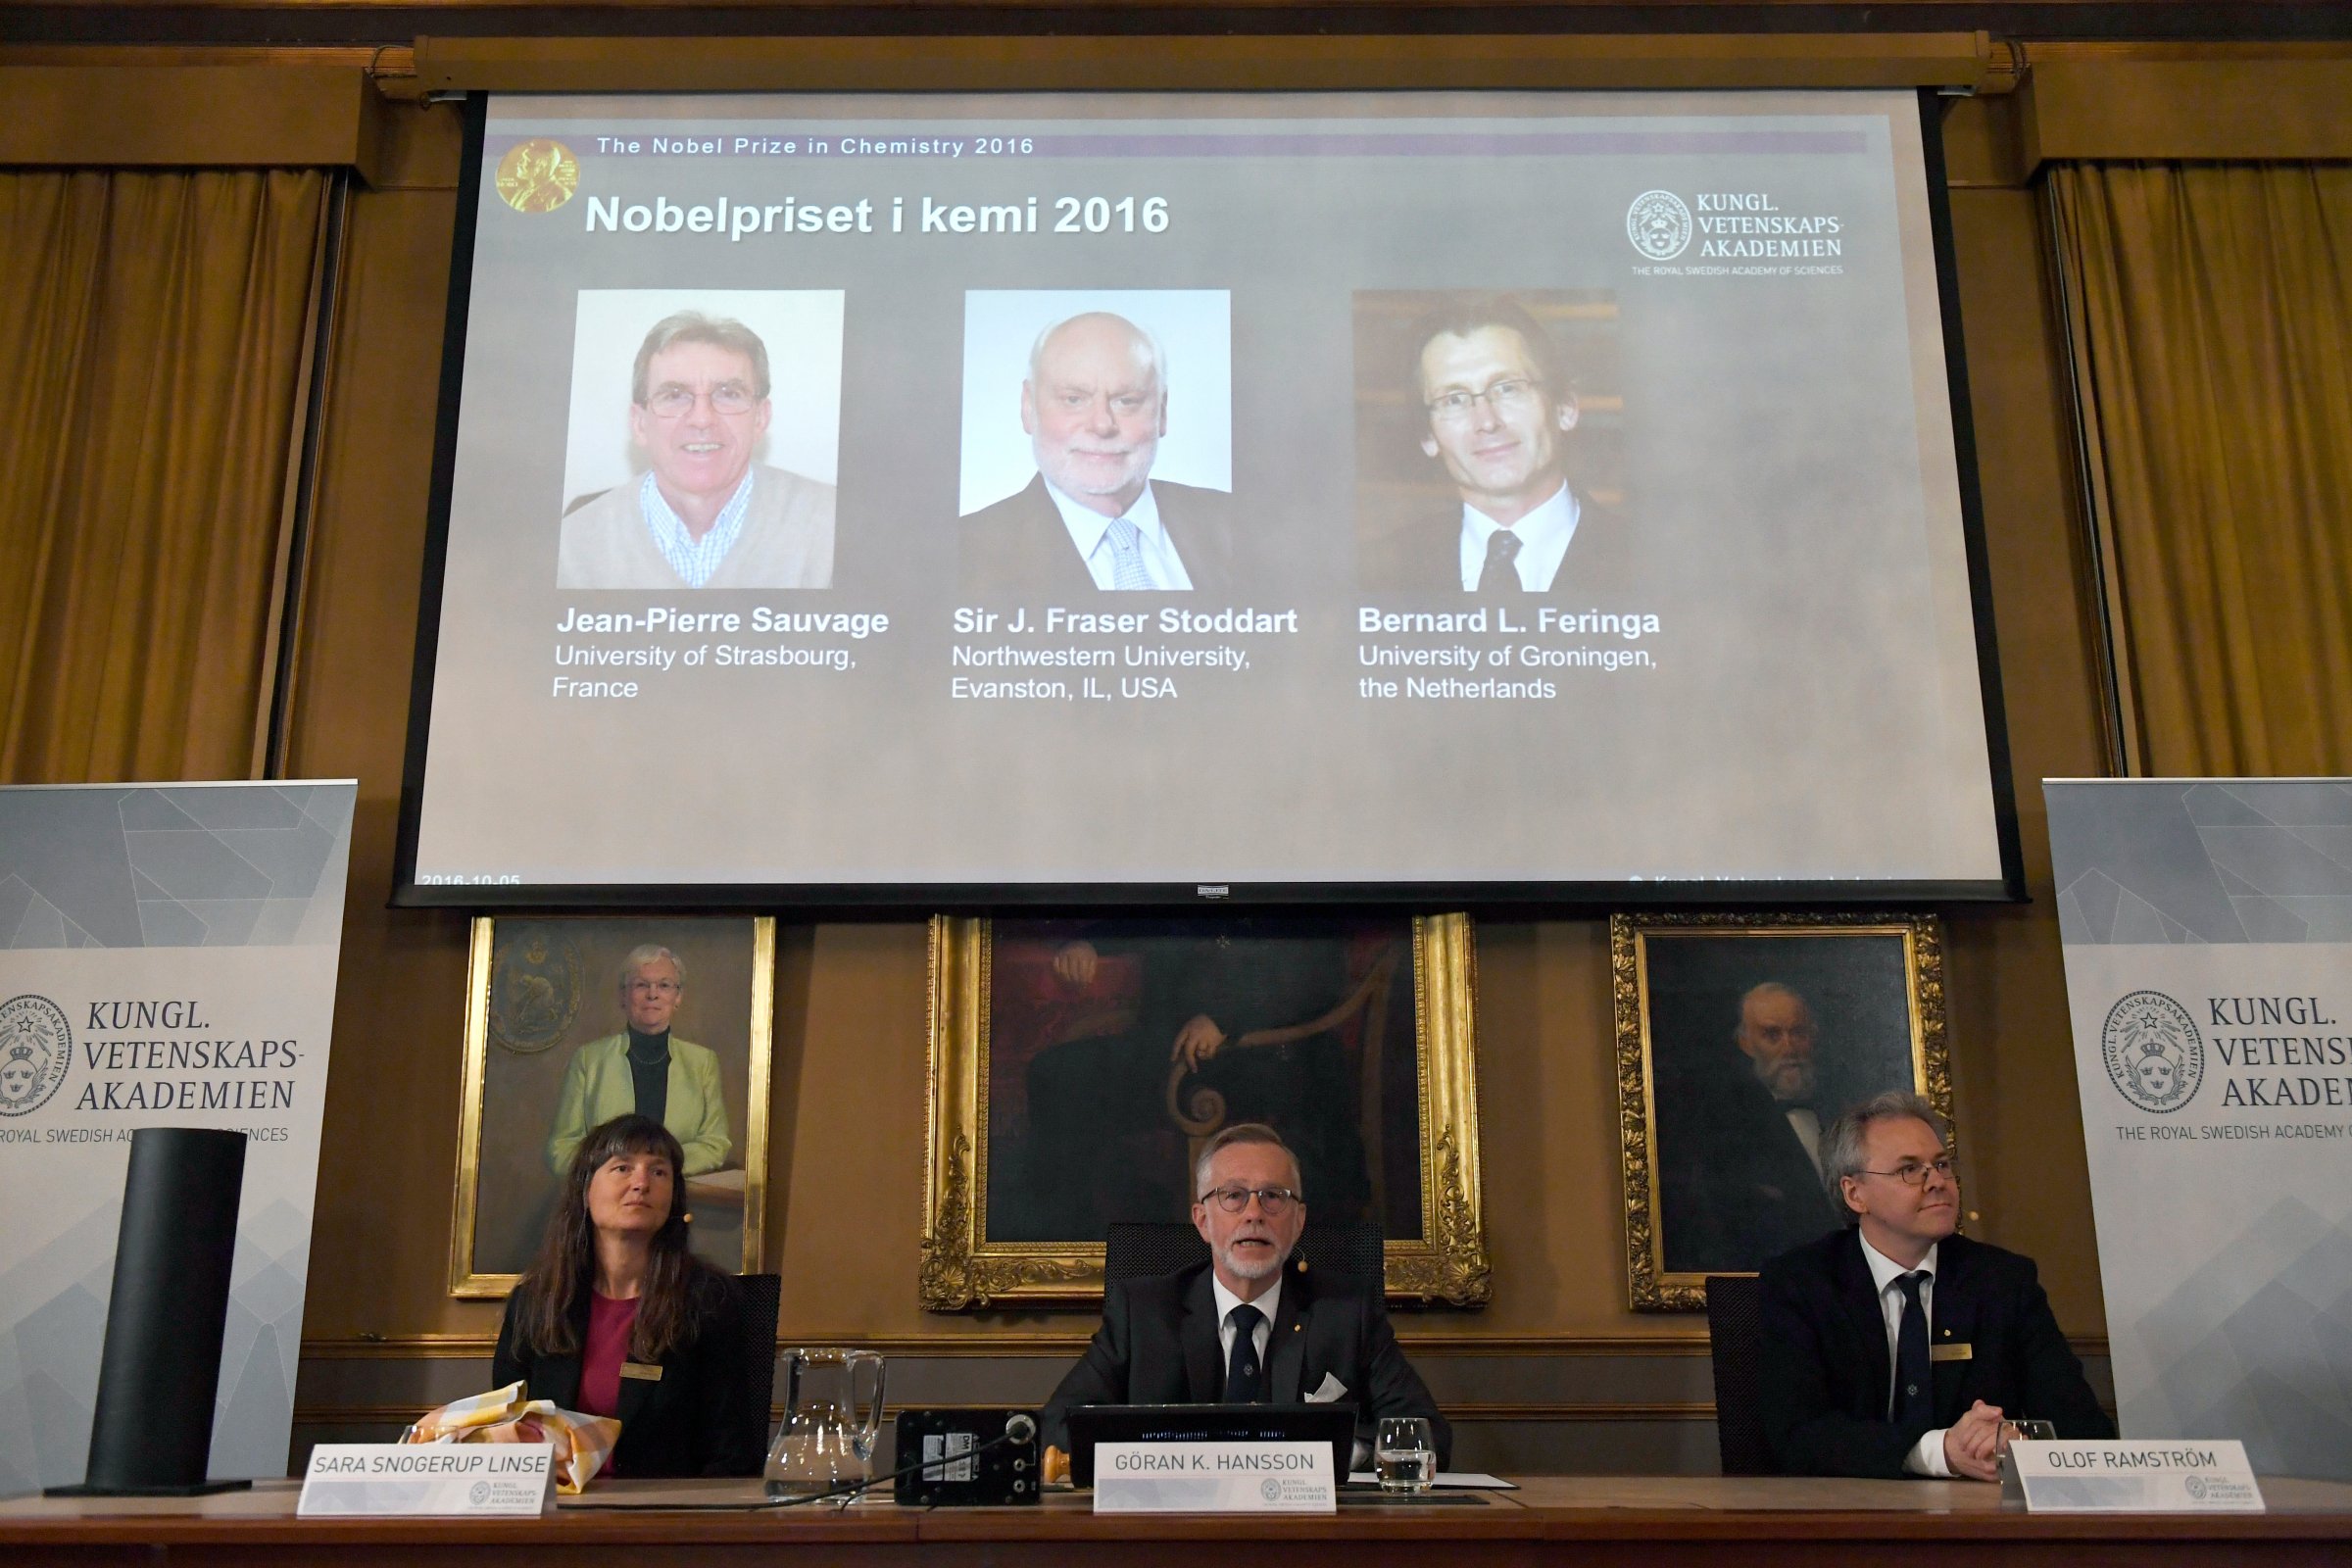 The Royal Academy of Sciences members, from left to right, Professor Sara Snogerup Linse, Professor Goran K Hansson and Professor Olof Ramstrom present the 2016 Nobel Chemistry Prize at the Royal Swedish Academy of Sciences, in Stockholm, Sweden, Wednesday, Oct. 5, 2016. Jean-Pierre Sauvage, Fraser Stoddart and Bernard Feringa have been awarded the Nobel chemistry prize. (Henrik Montgomery /TT via AP)